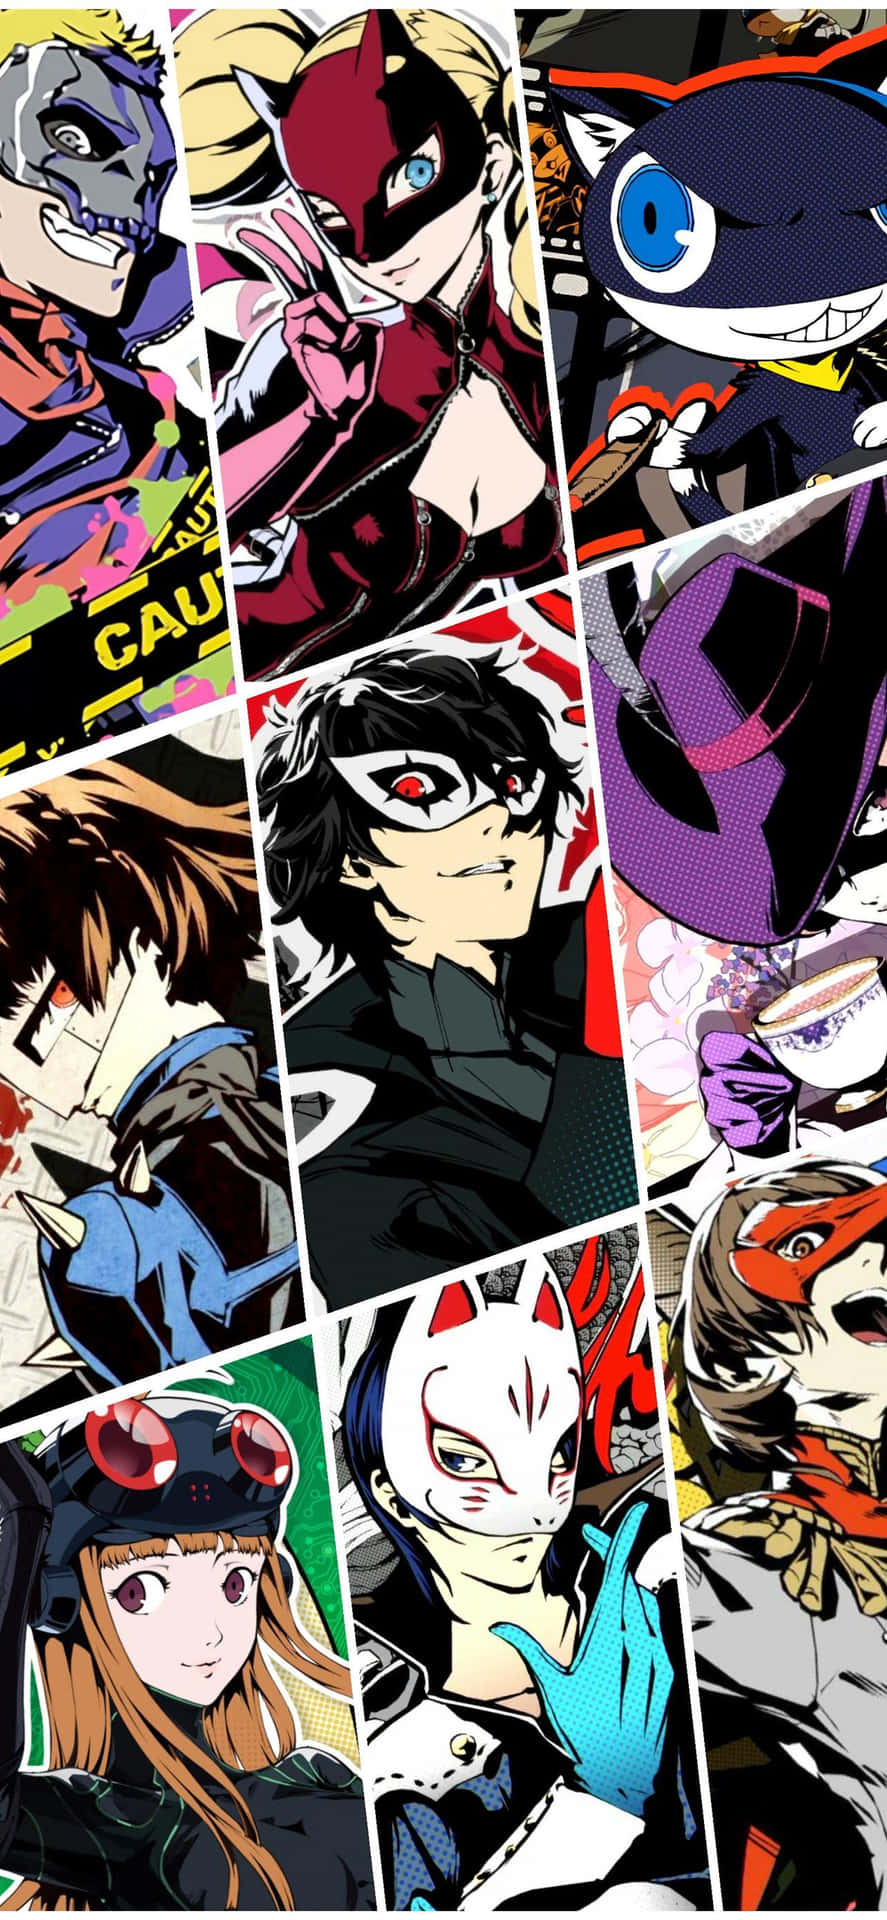 Enjoy a deep and stylish role-playing game on the go with the Persona 5 iPhone Wallpaper